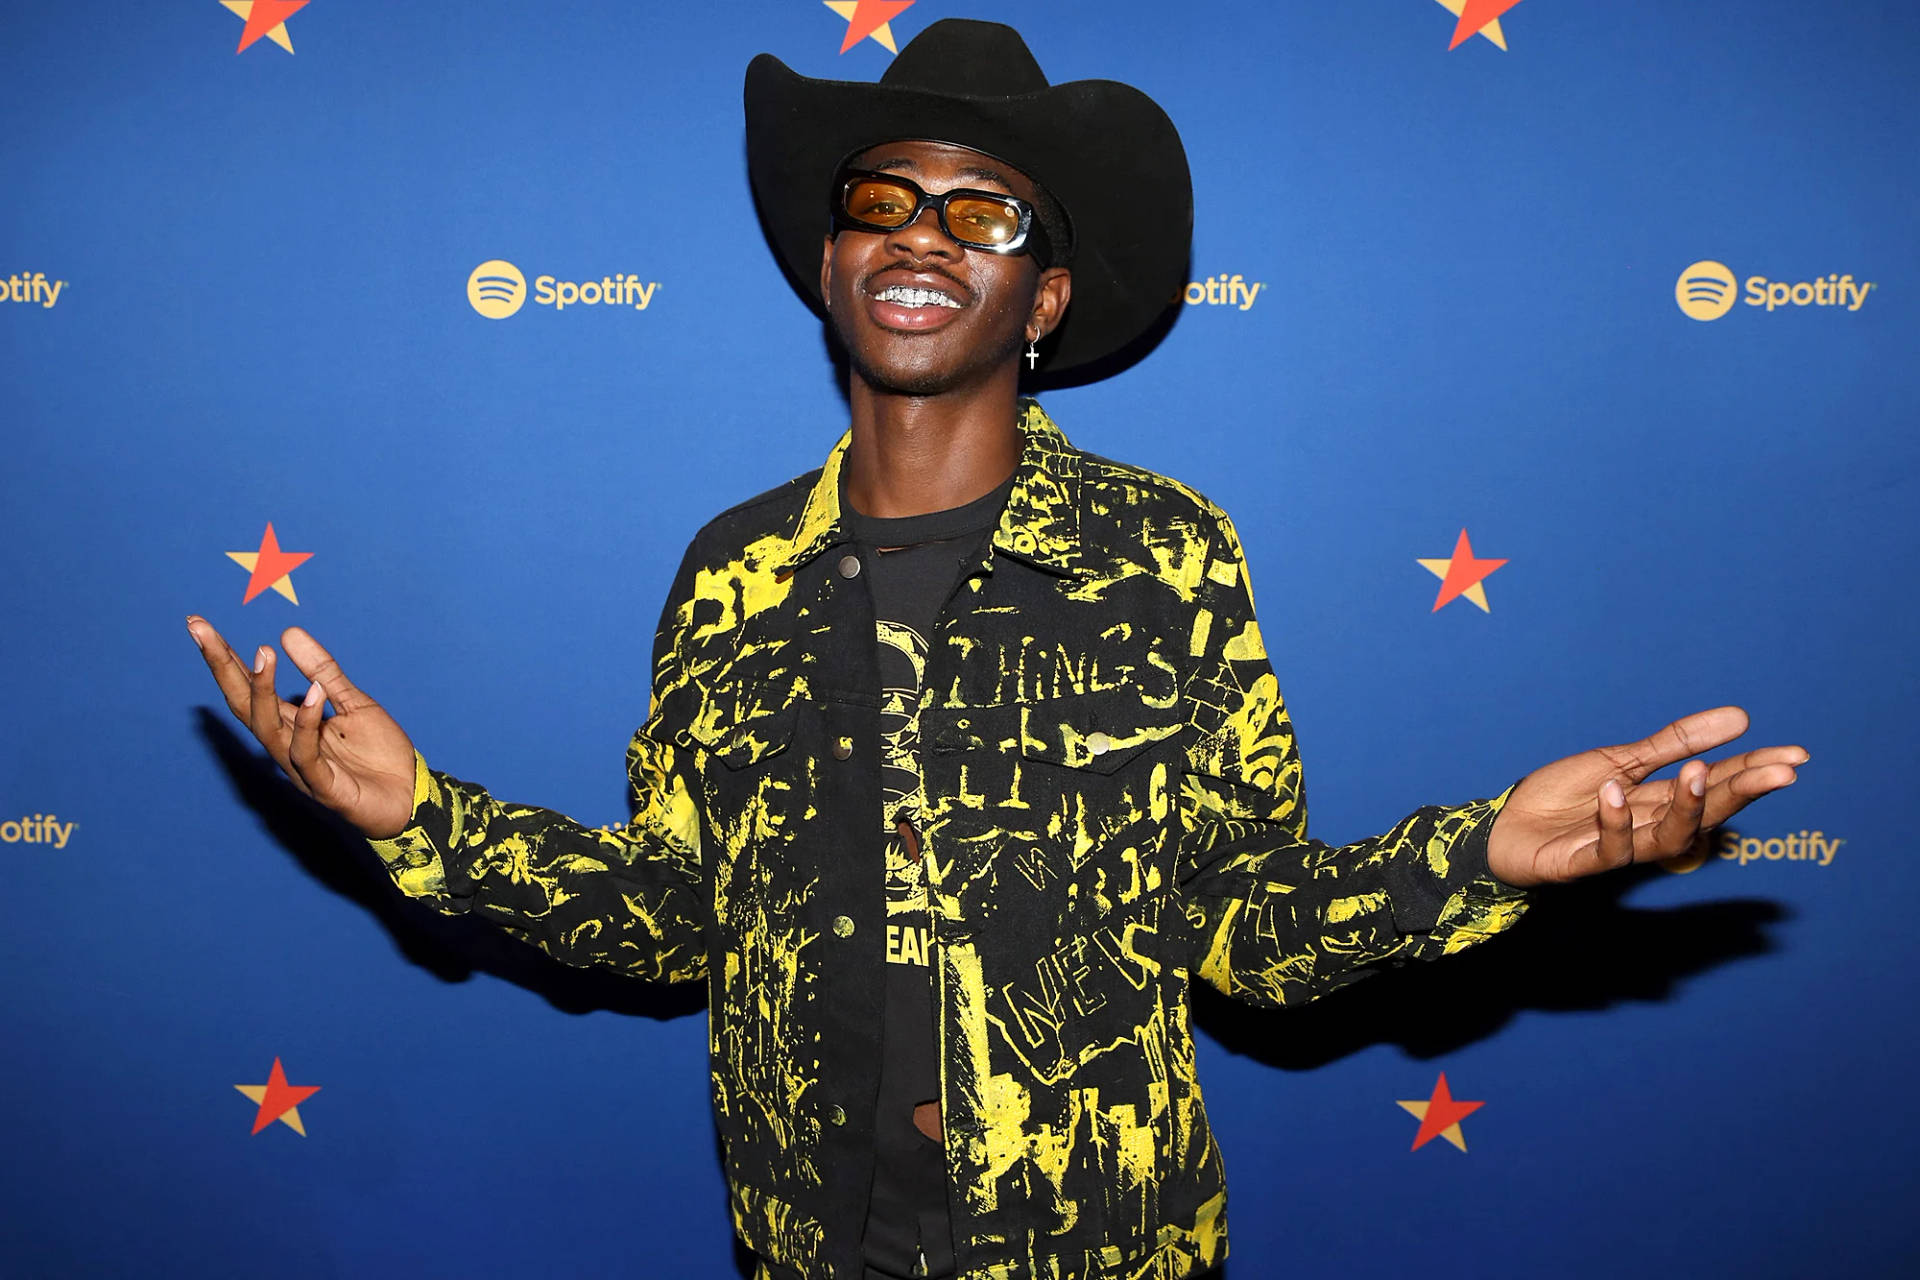 Lil Nas X At Spotify Event